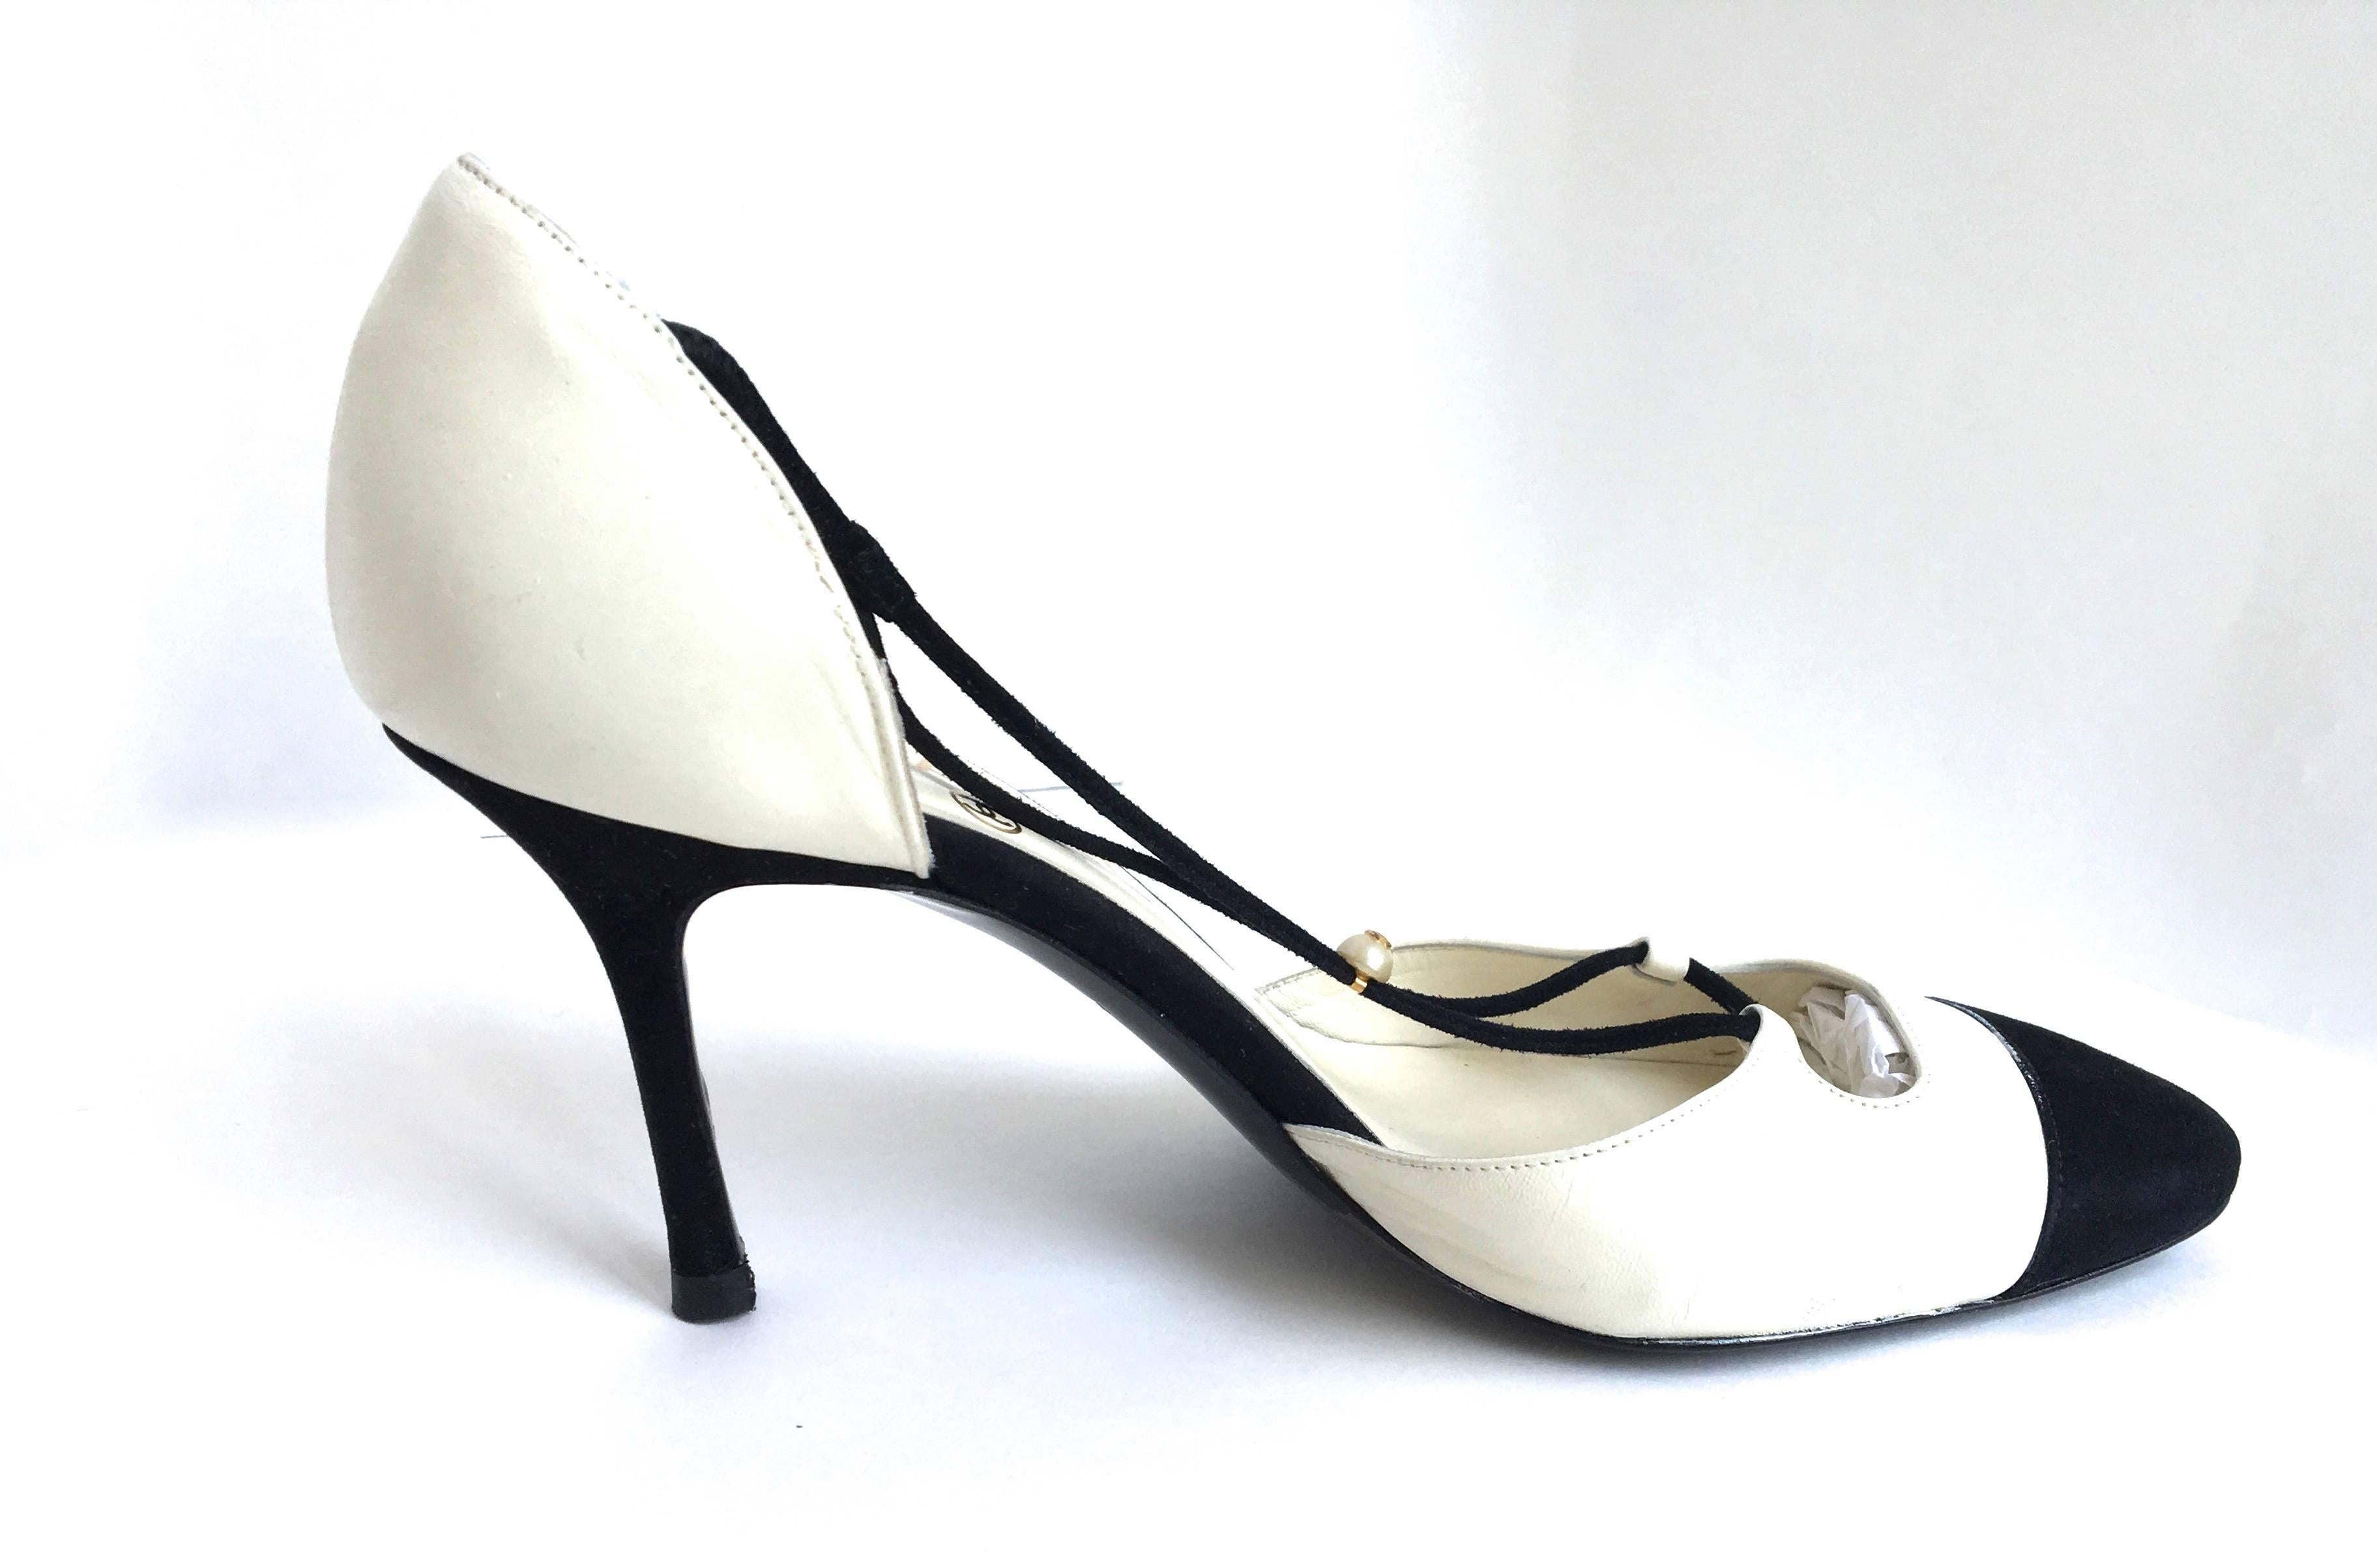 Gray Chanel Shoes - Size 38 - Magnificent Black Suede with Creamy White Leather For Sale